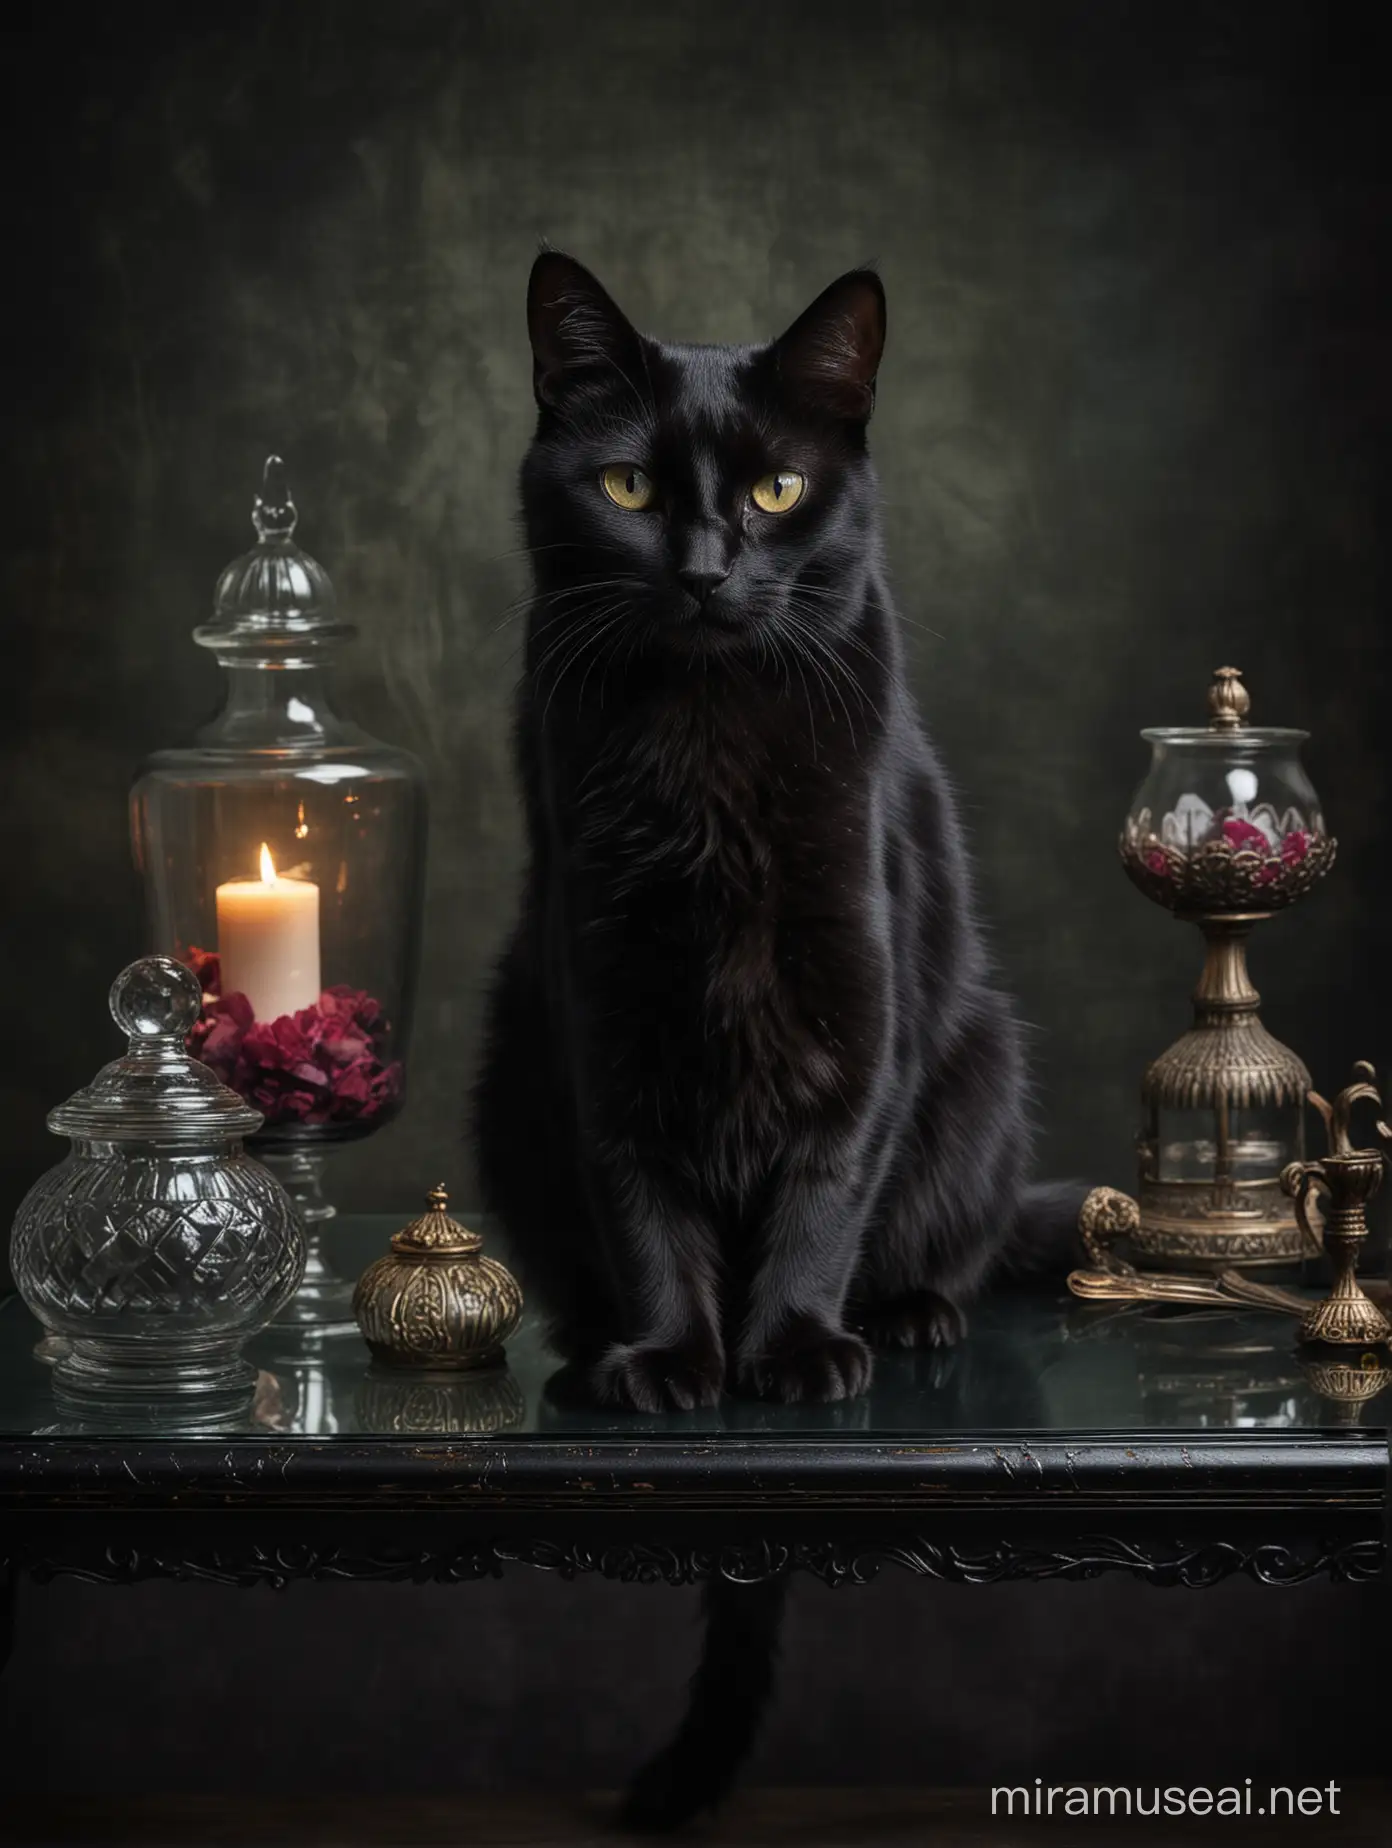 A studio portrait of  a black cat on a glass table, with a dark background. The theme is of Alice in Wonderland, with lots of relevant props....all done in a dark gothic style. 
